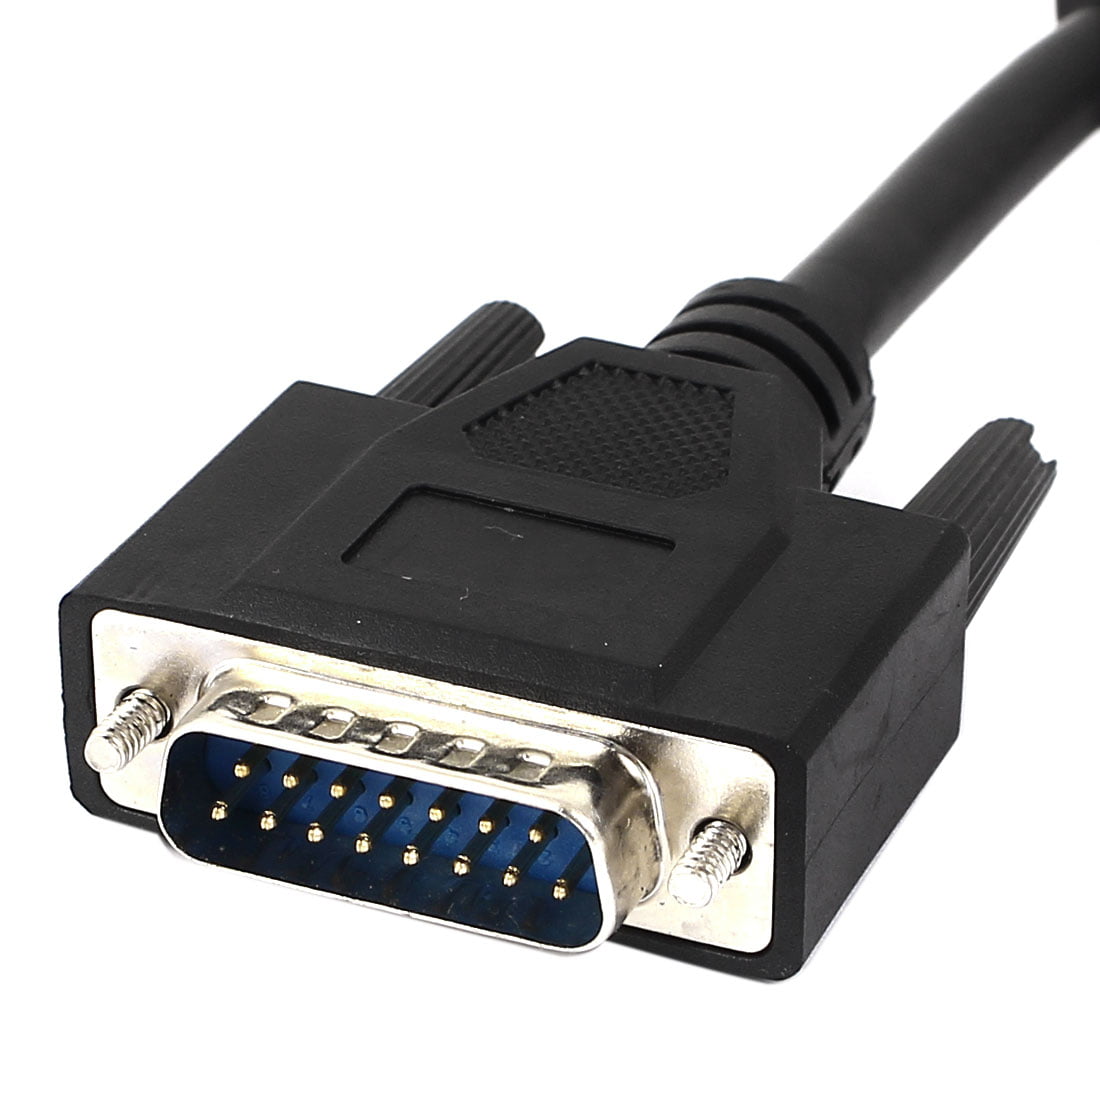 Male to Female 15-Pin Gold Plated Connecter Straight Through Cord Jienk 10ft DB15 RS232 15 Pin Serial Extension Cable 